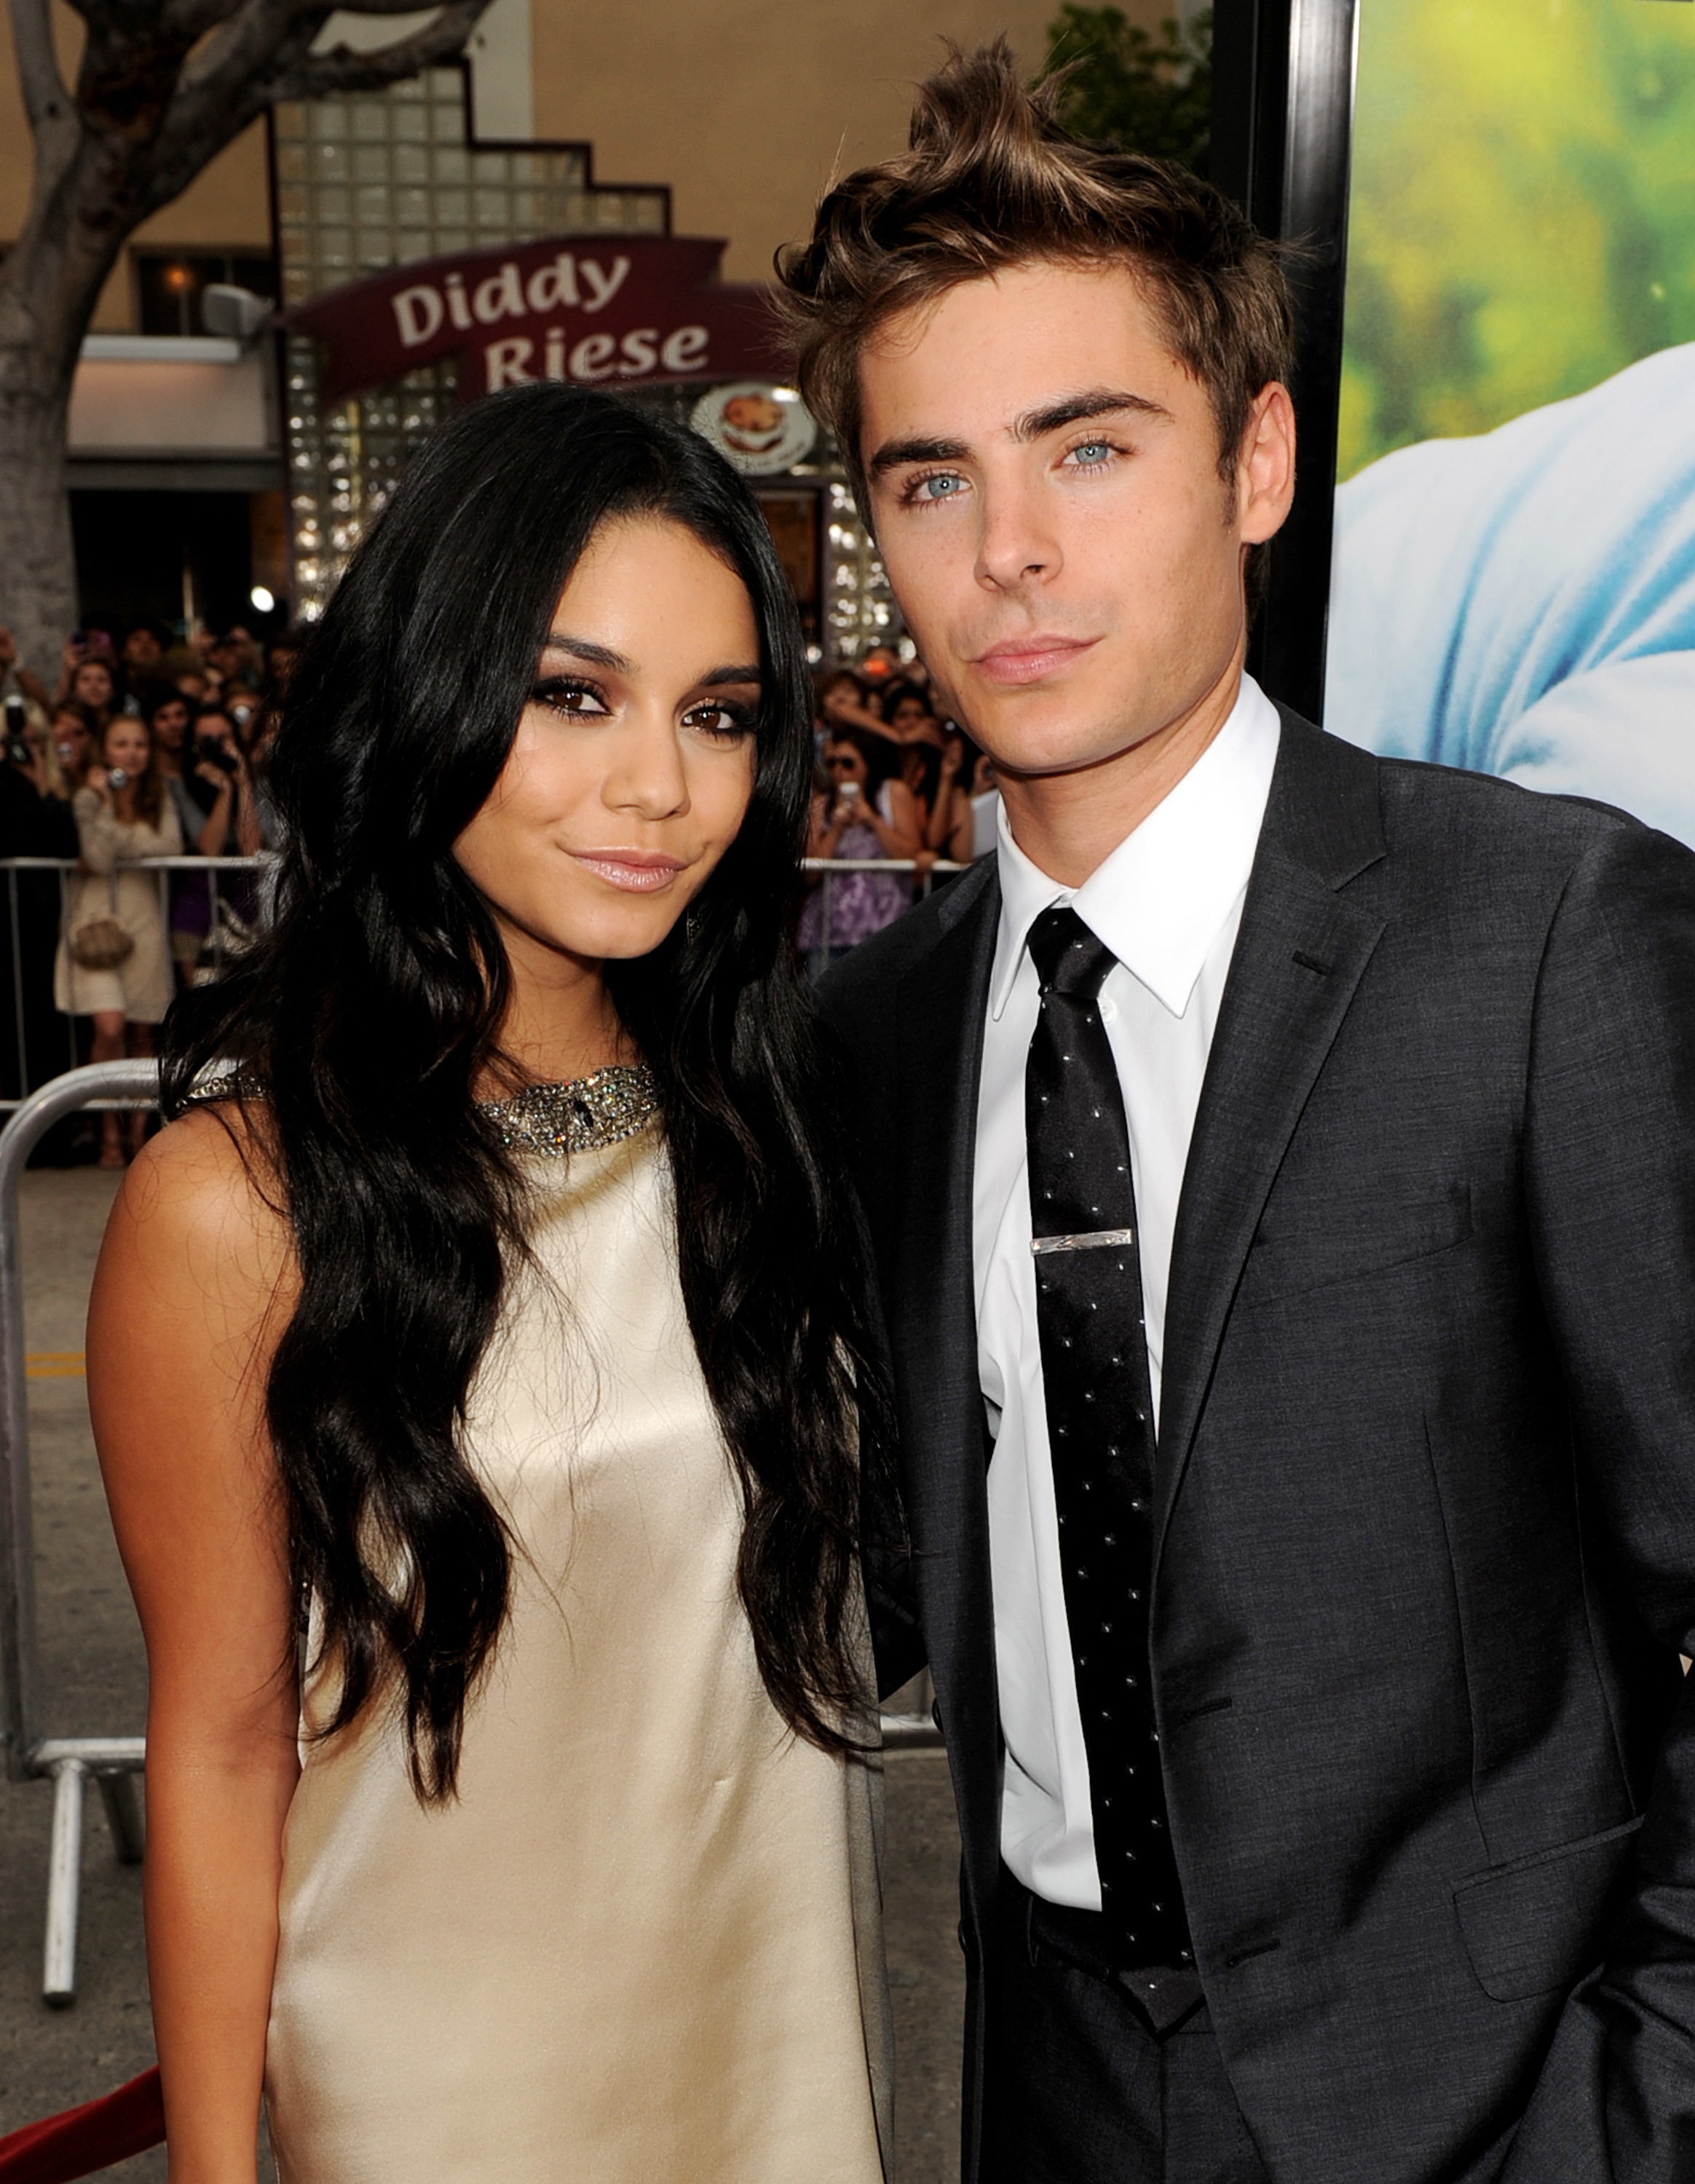 Close-up of Zac and Vanessa at a media event